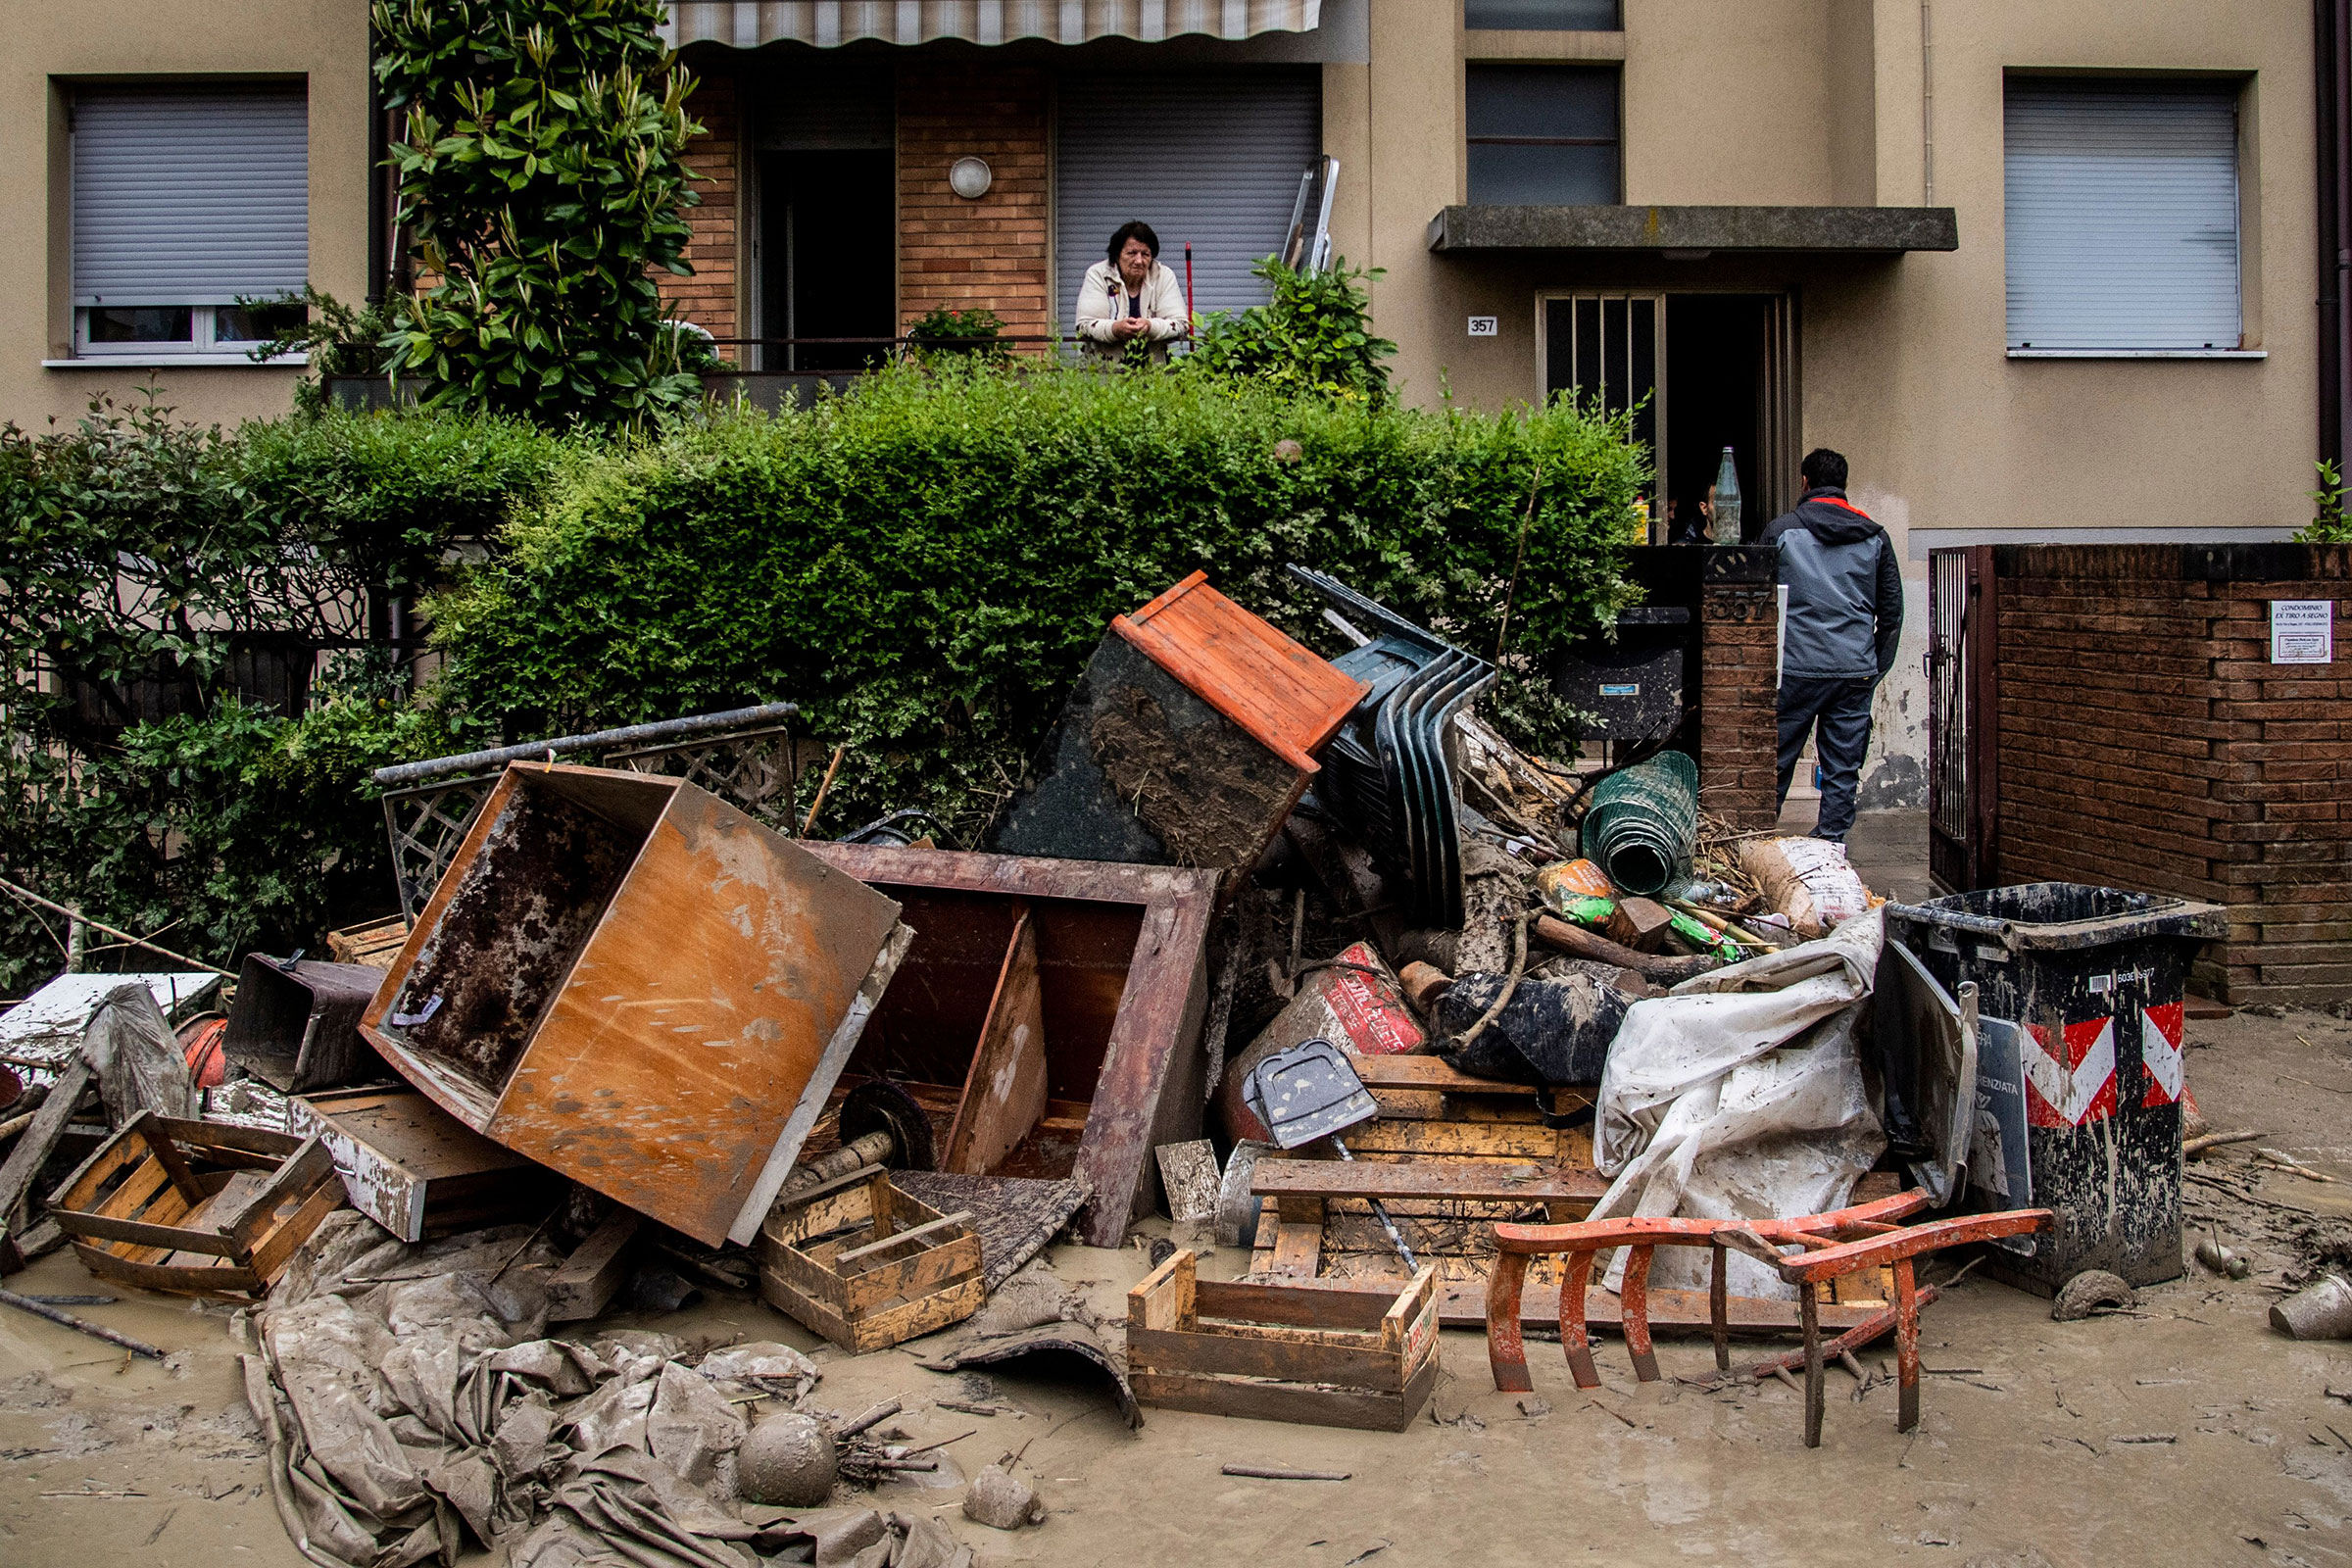 Damaged furniture from flooding sits outside of a home in Cesena on May 17. (Alessandro Serrano—AGF/Shutterstock)